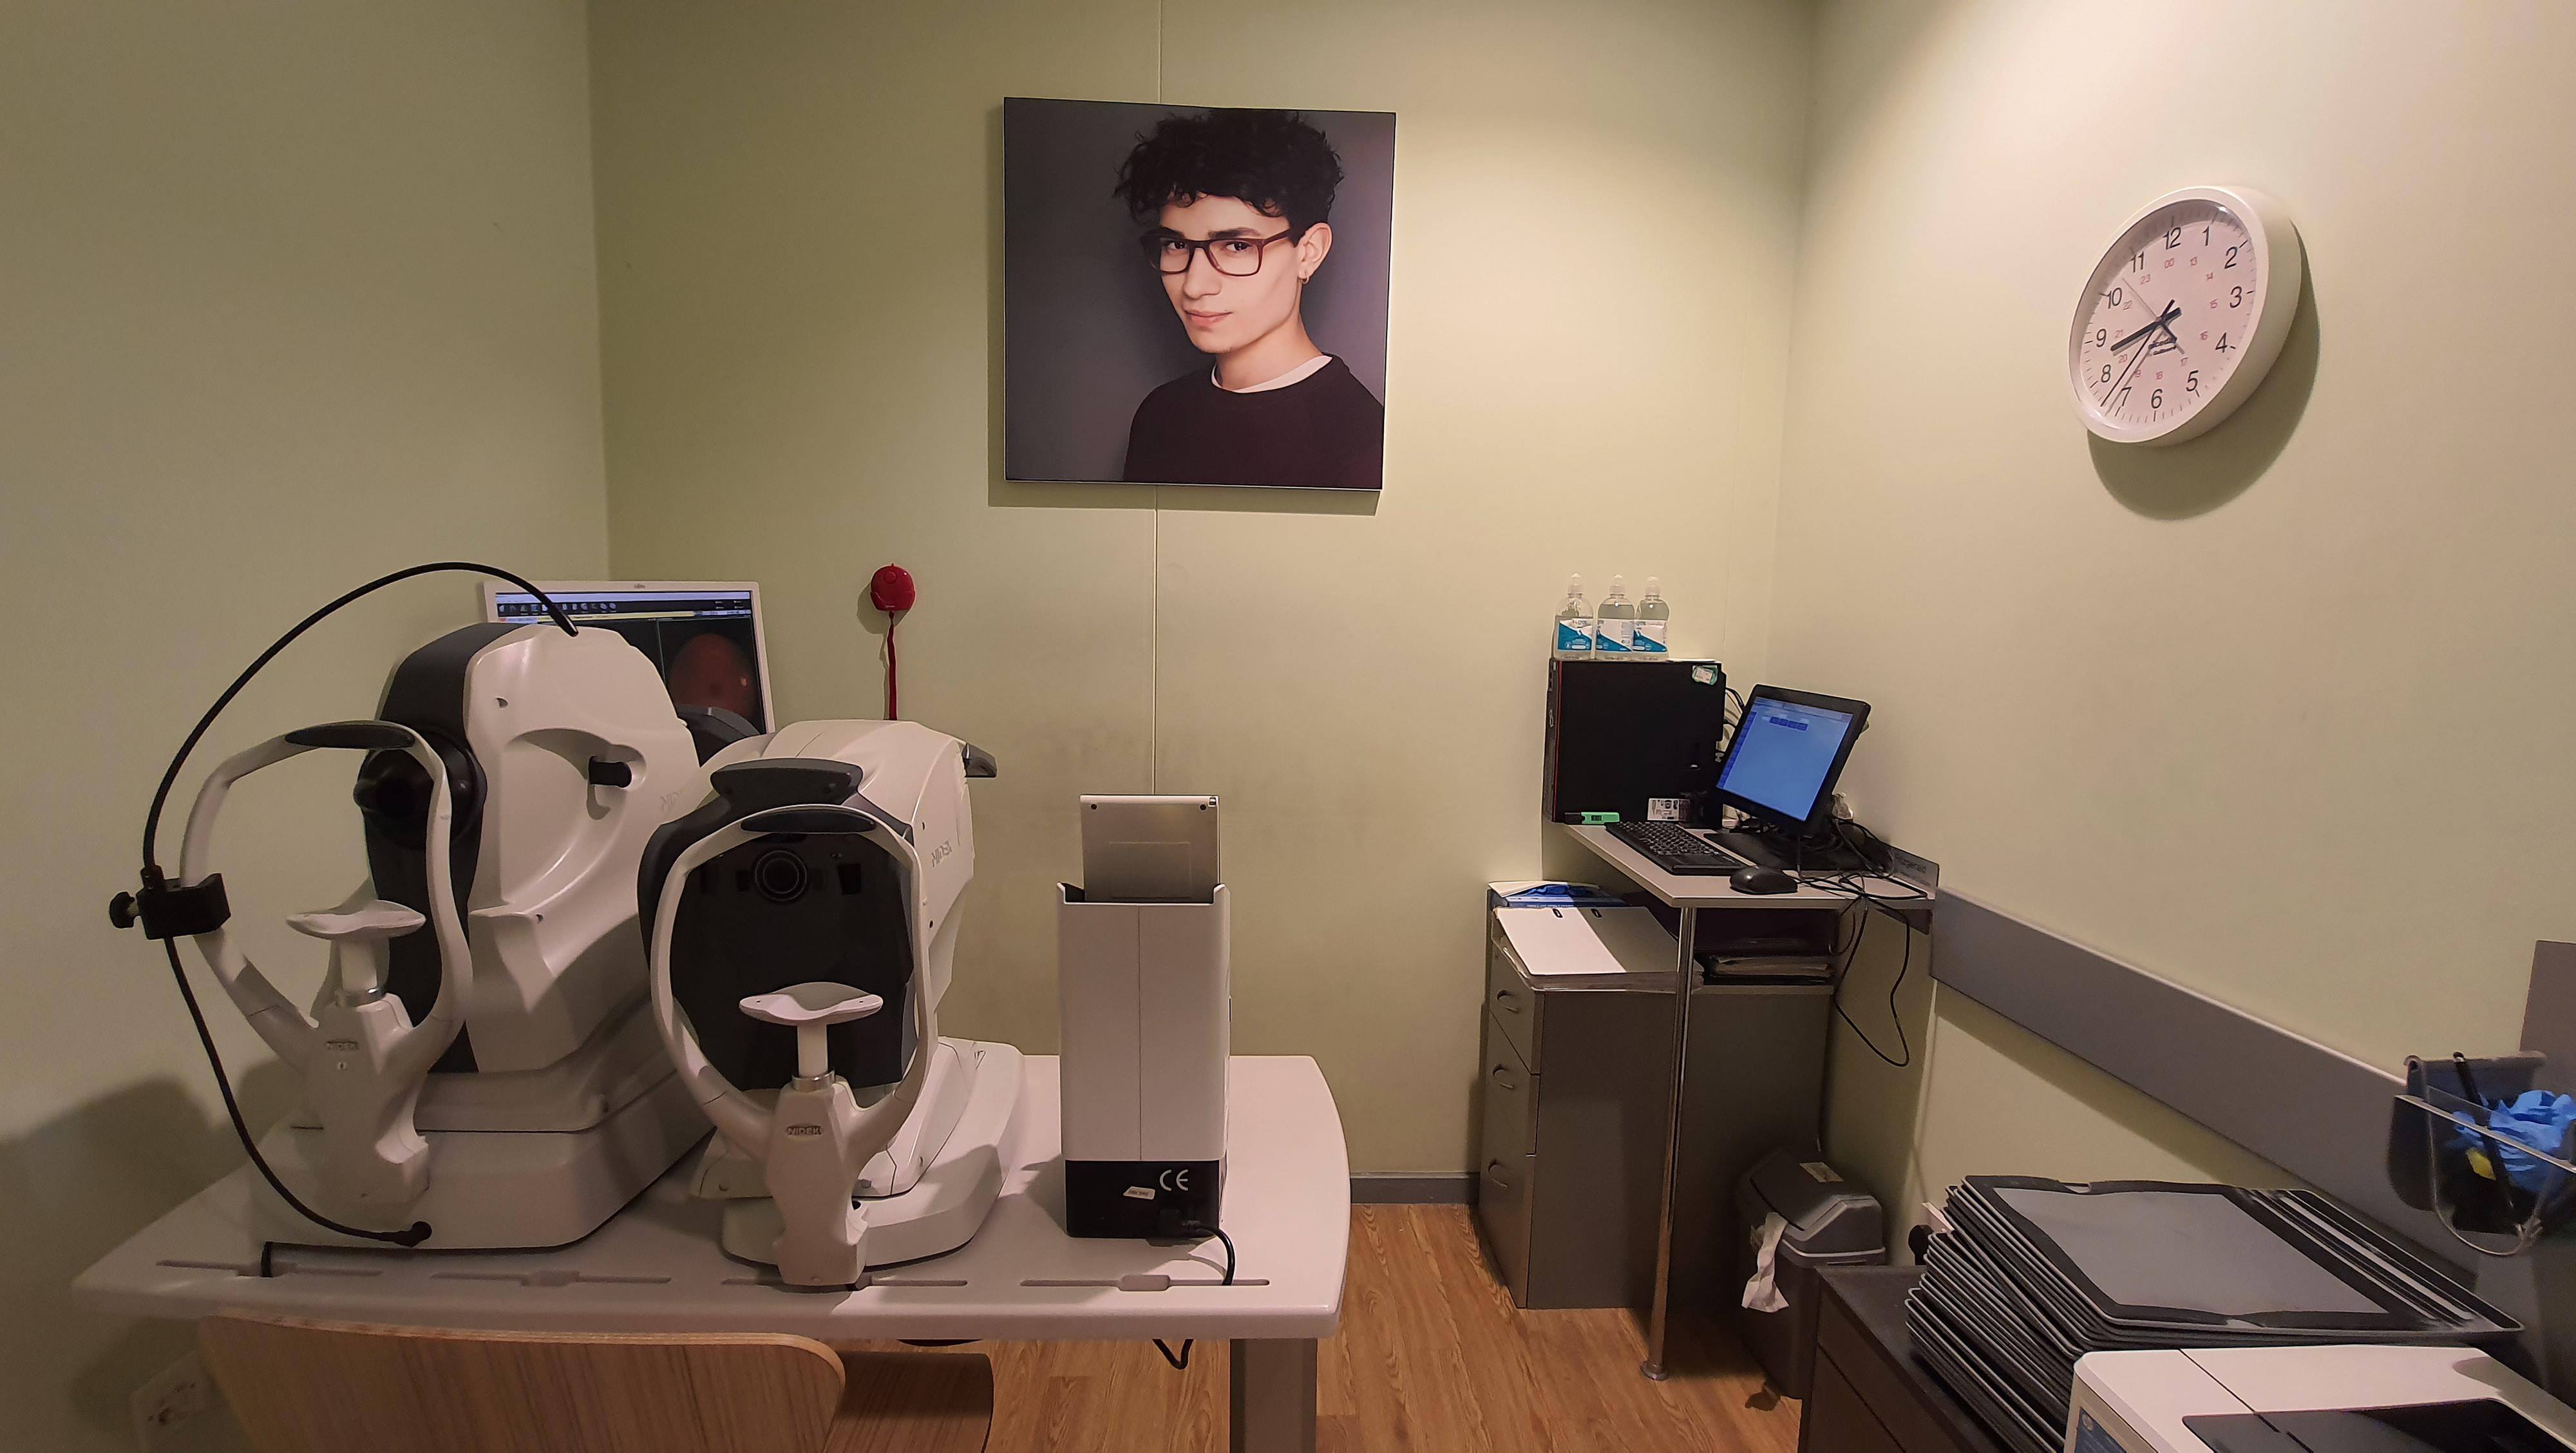 Images Specsavers Opticians and Audiologists - Ringwood